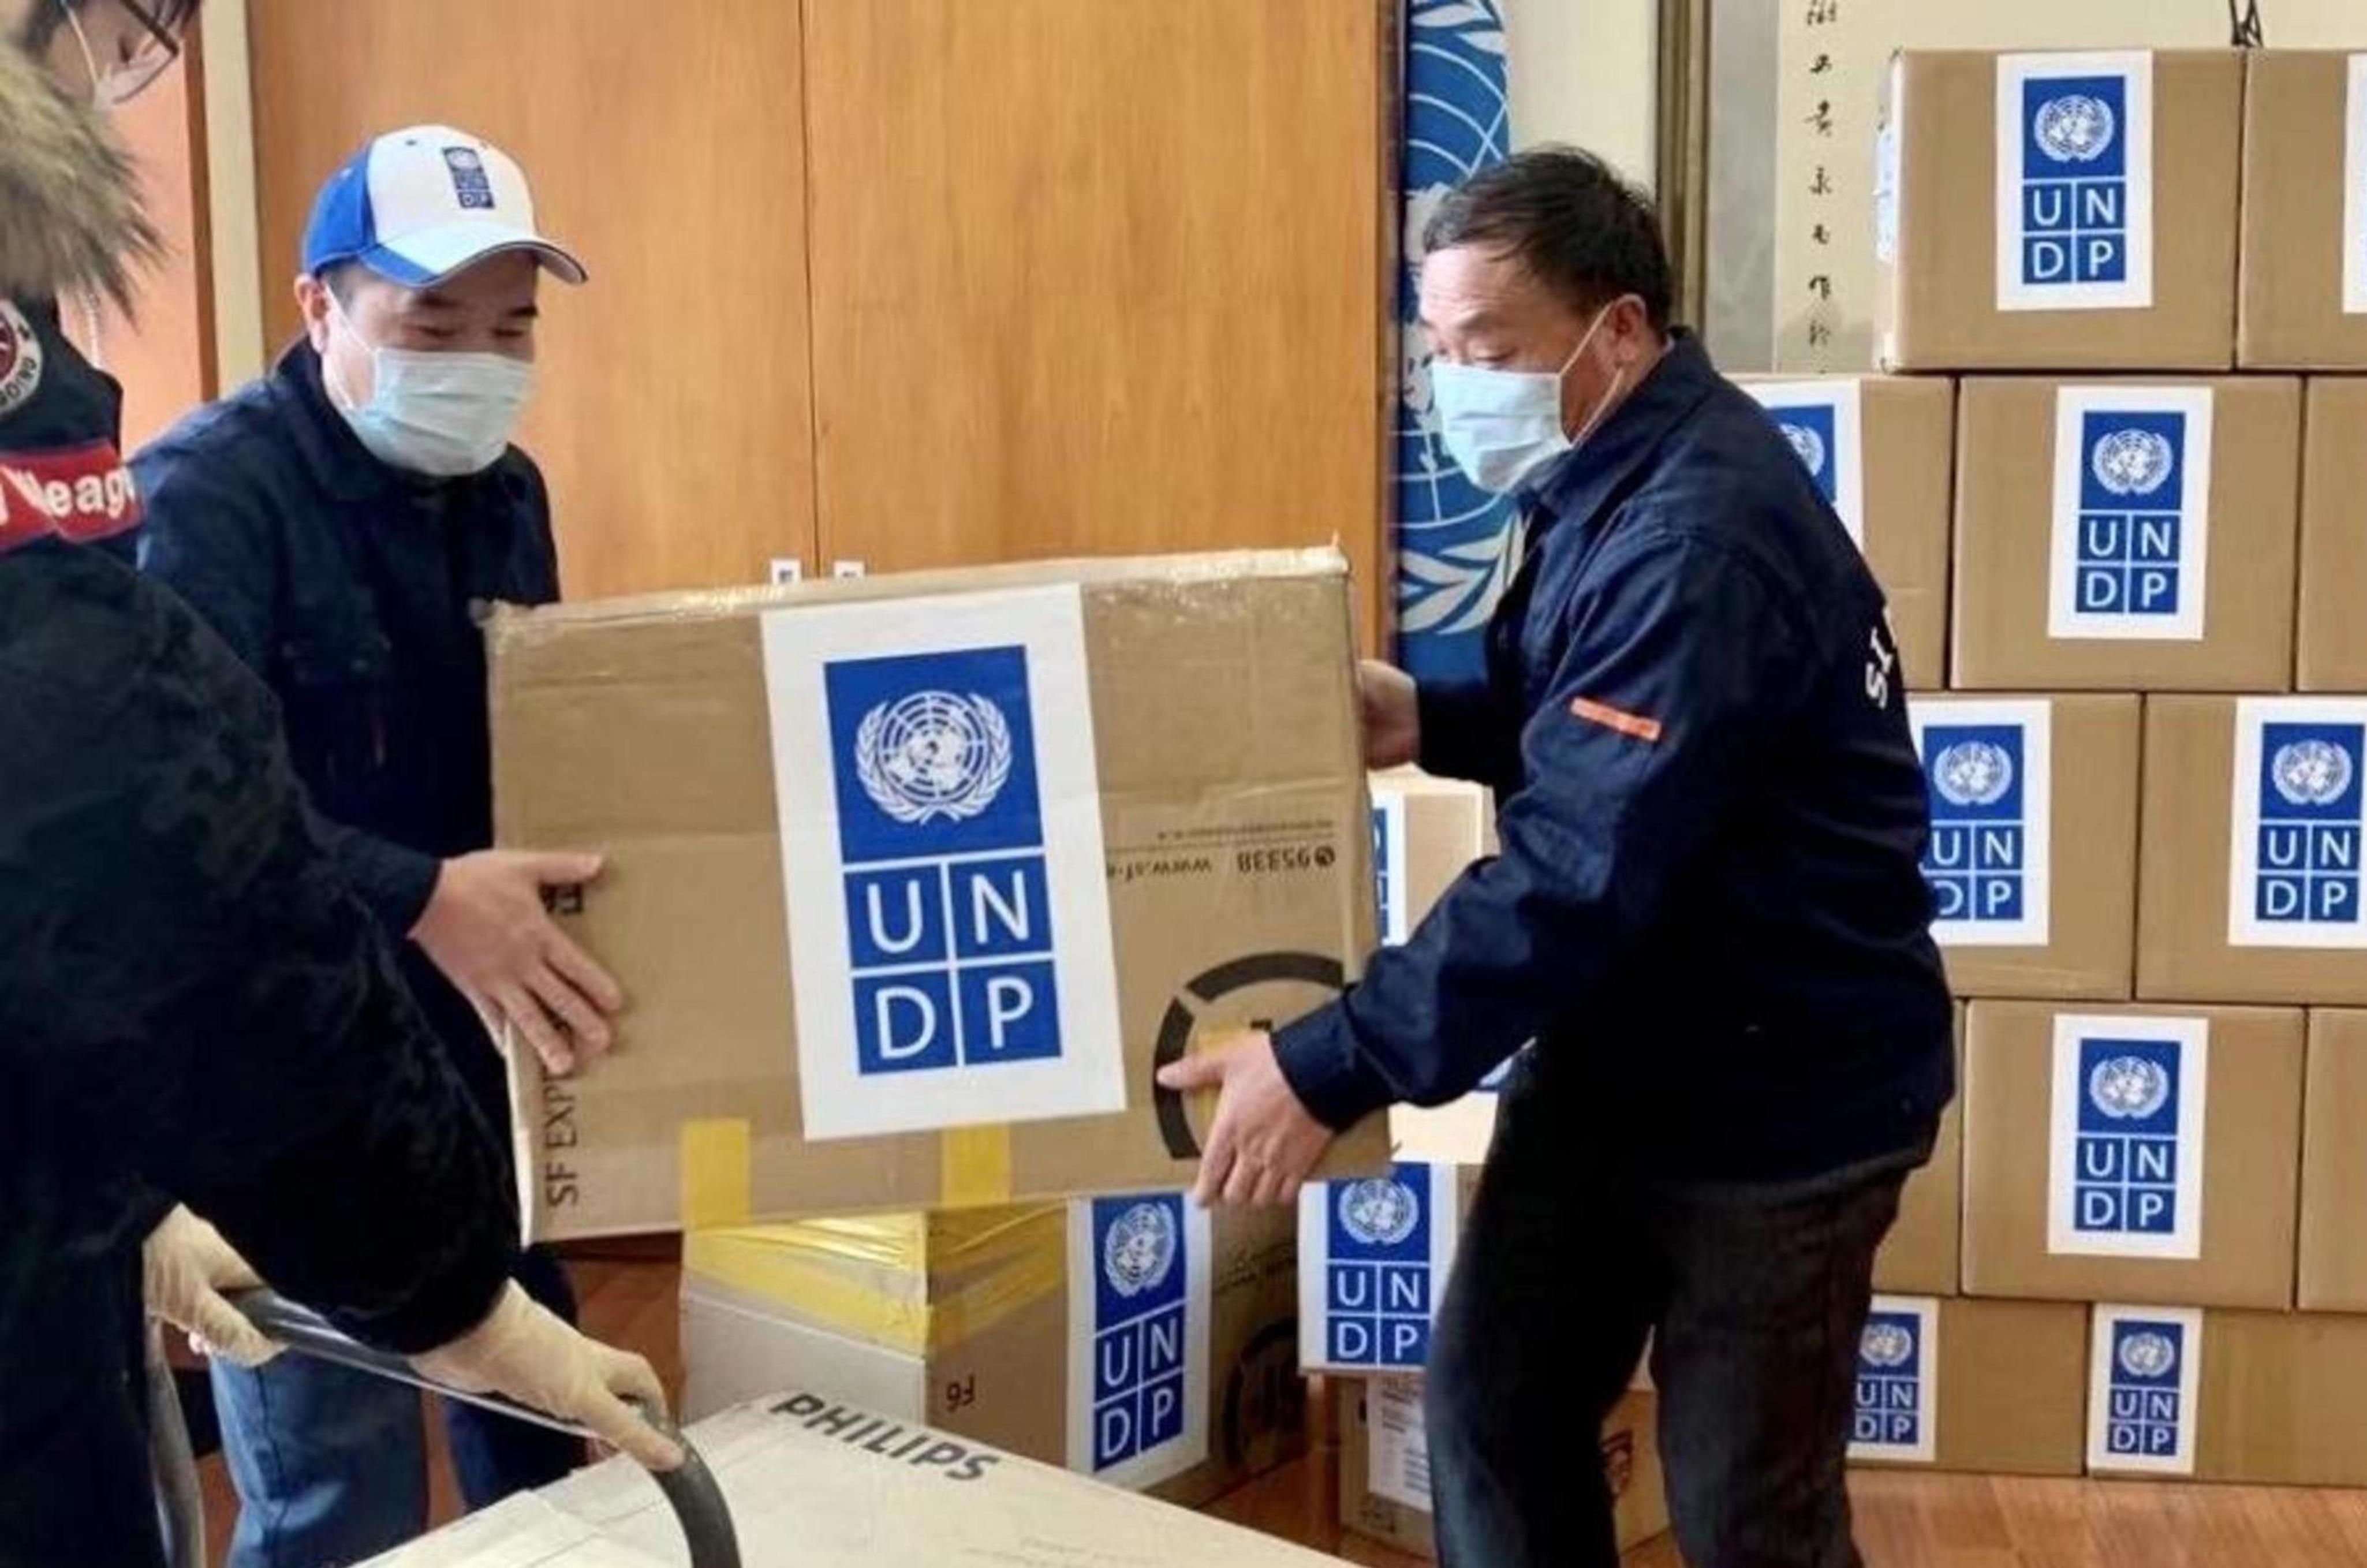 Medical supplies provided by the UN Development Program to help China combat the COVID-19, Beijing, China, February 12, 2020. /Xinhua